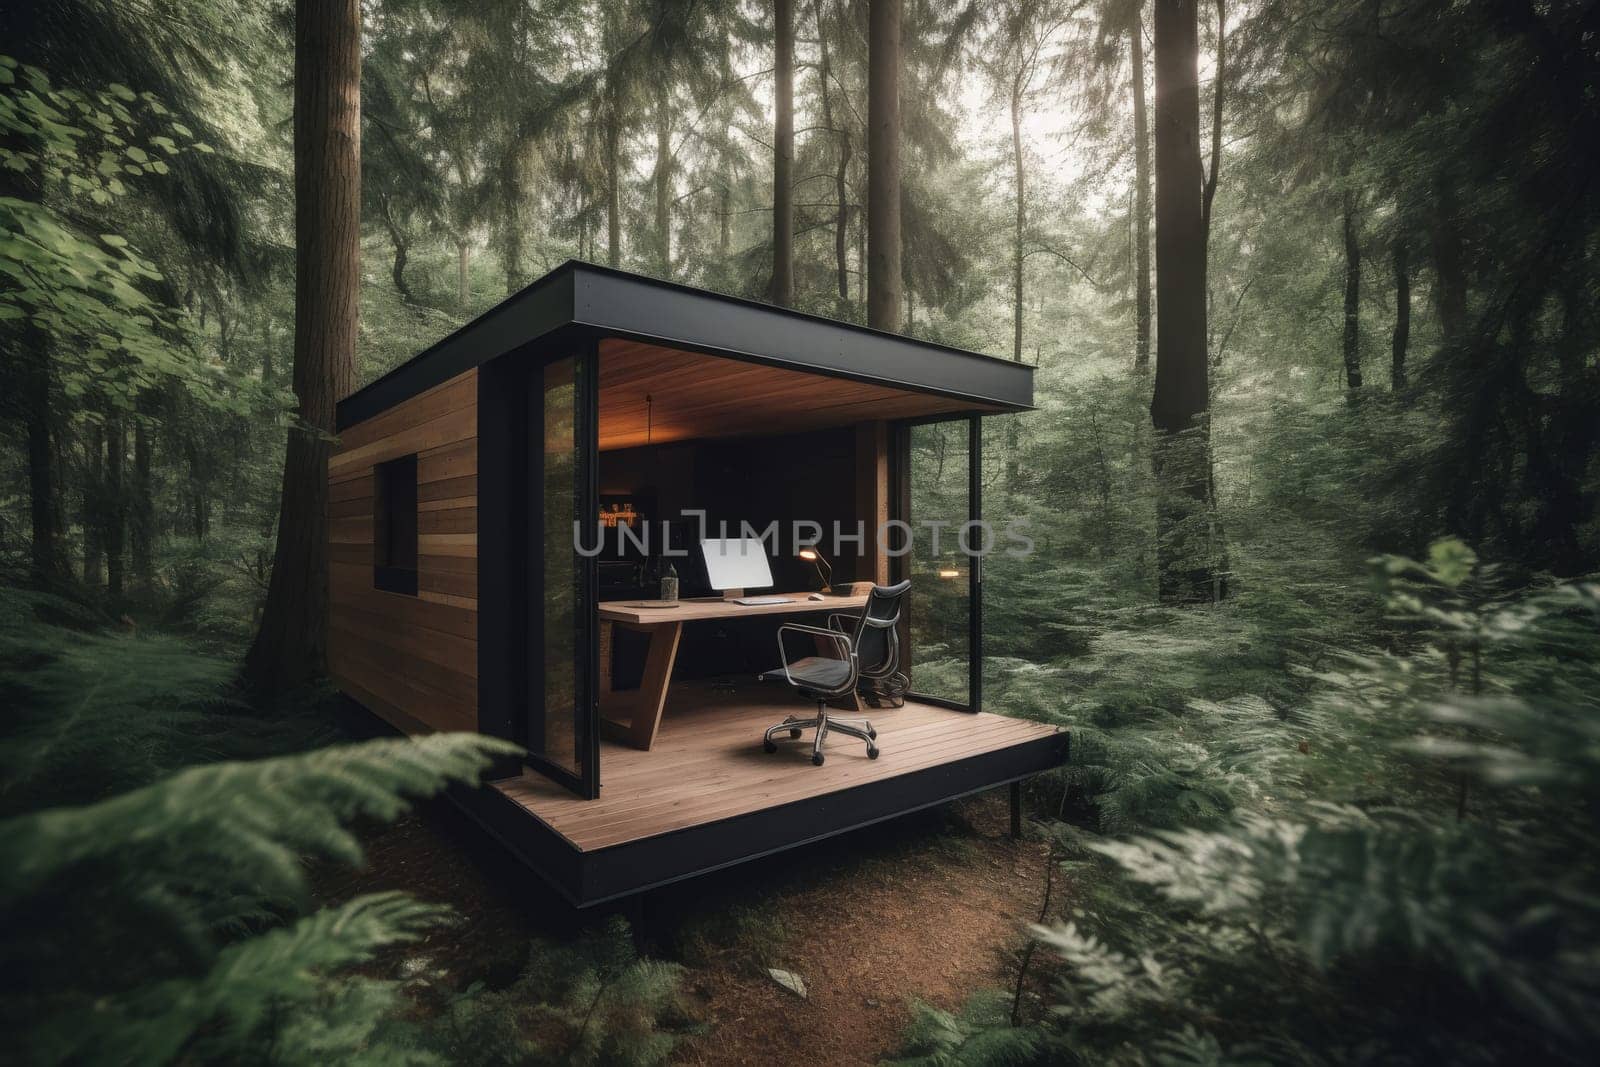 A tranquil outdoor office space nestled among towering trees, with dappled sunlight filtering through the leaves onto a modern desk setup, invoking a peaceful work environment in nature